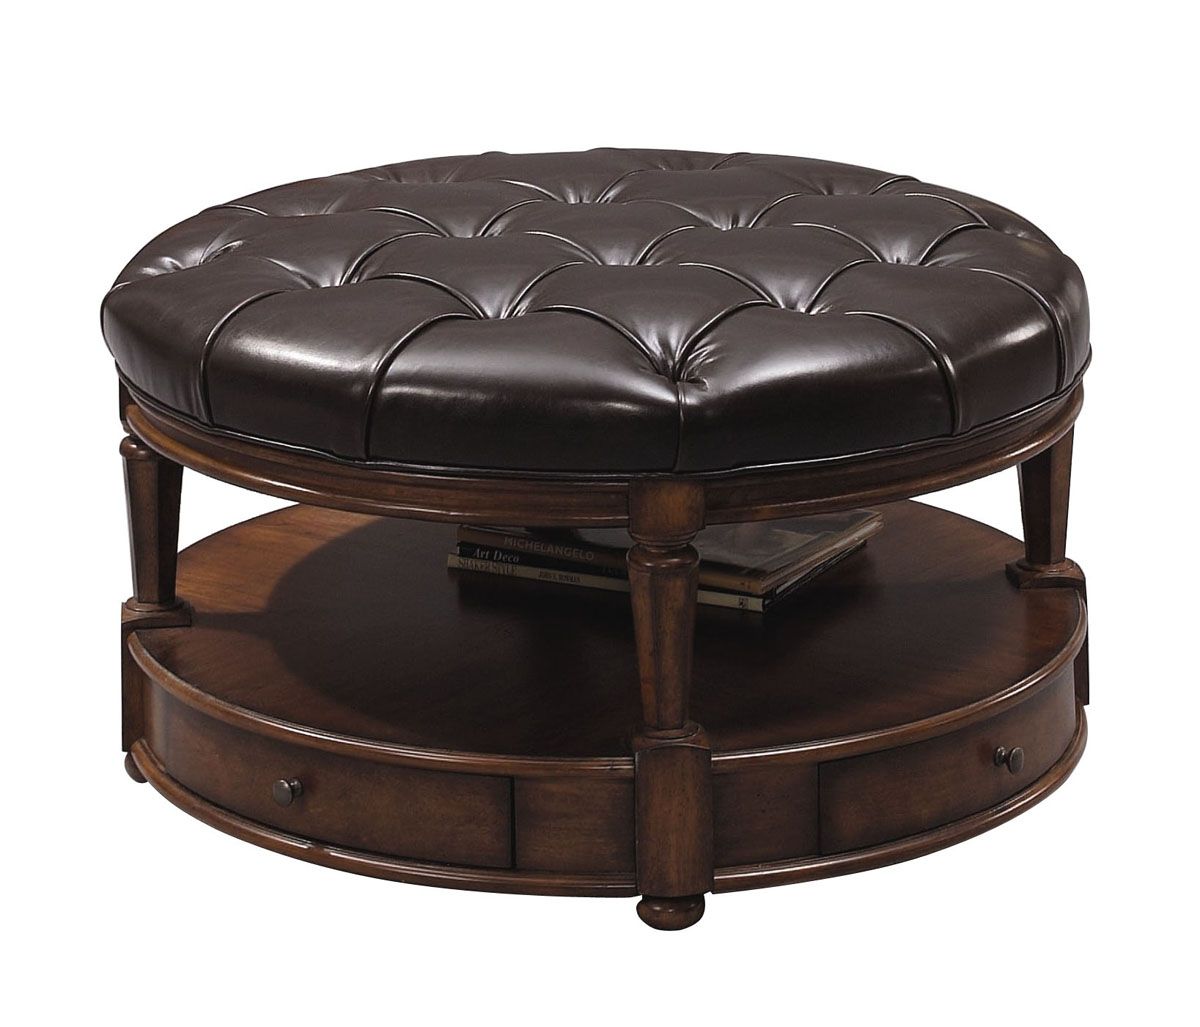 Round Coffee Table With Nesting Stools Round Coffee Table Ottoman With Storage Small Round Ottoman Coffee Table Decorate Your Living Room With Round Coffee Table (Photo 5 of 10)